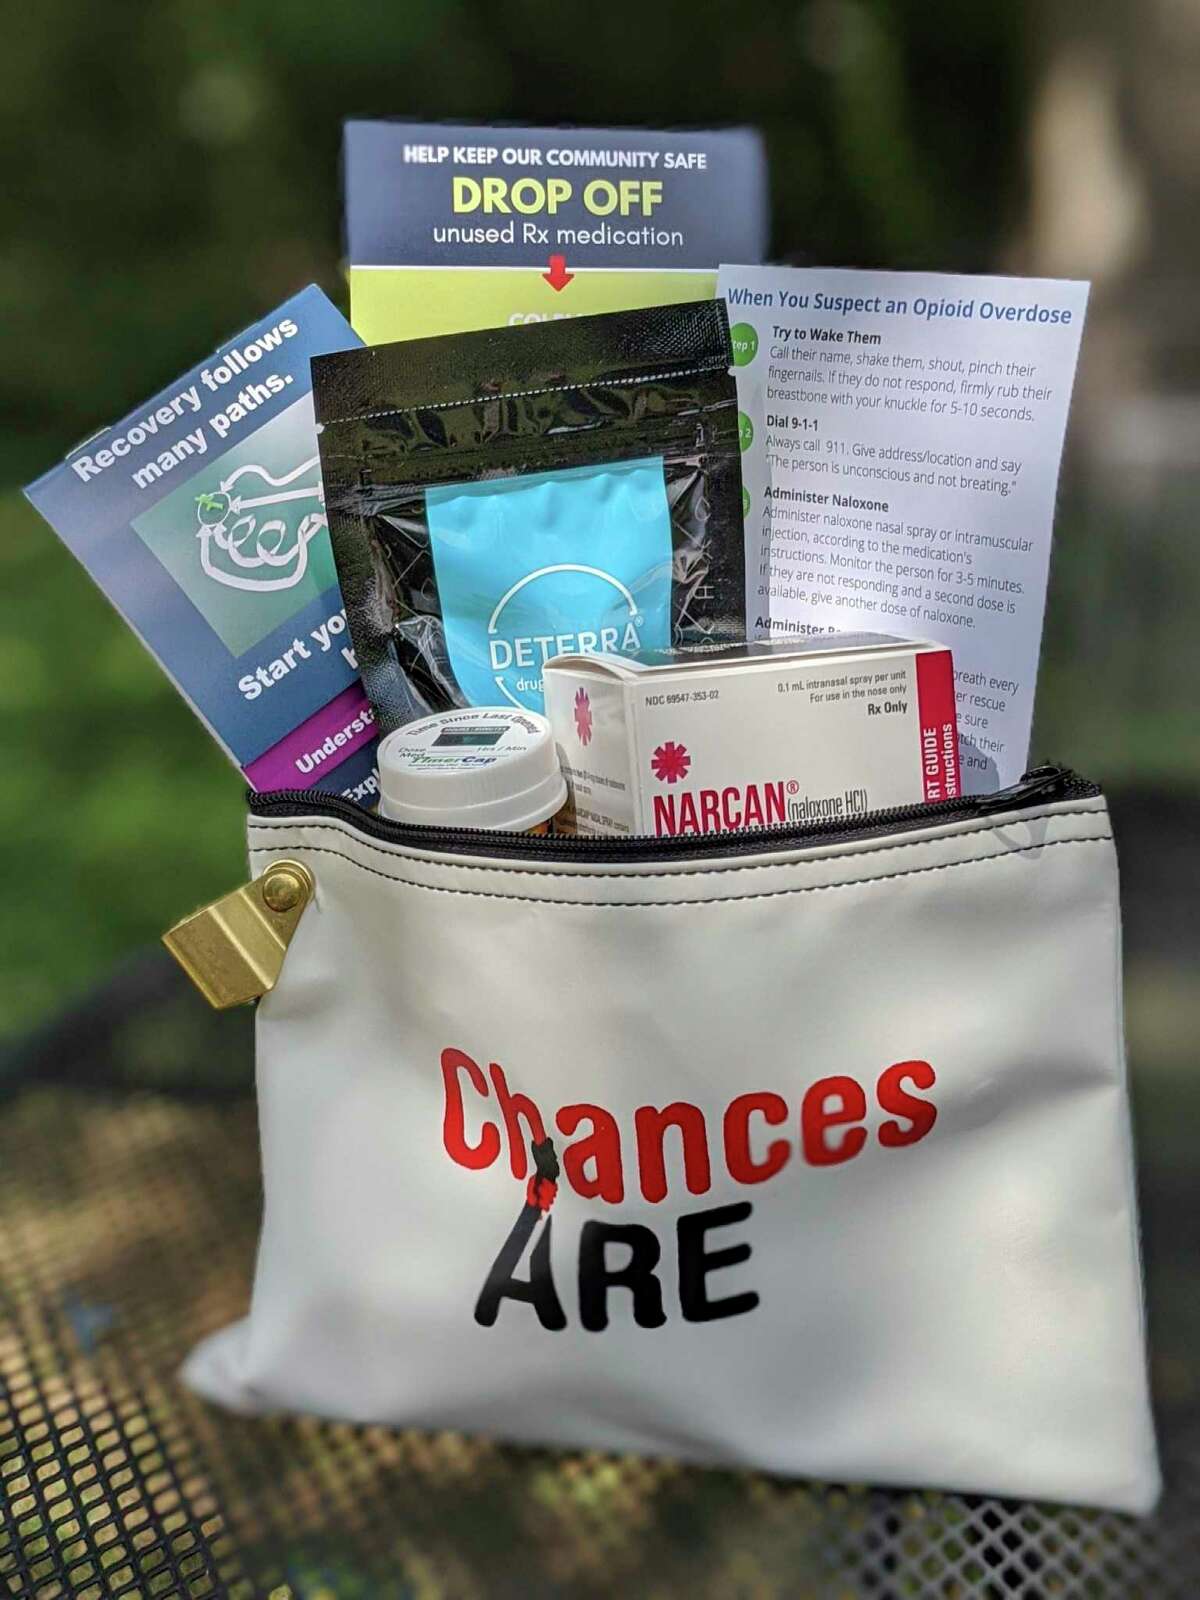 Ten organizations in Midland County will have medication safety kits on-hand to give out as a part of the Chances Are campaign. (Photo provided)